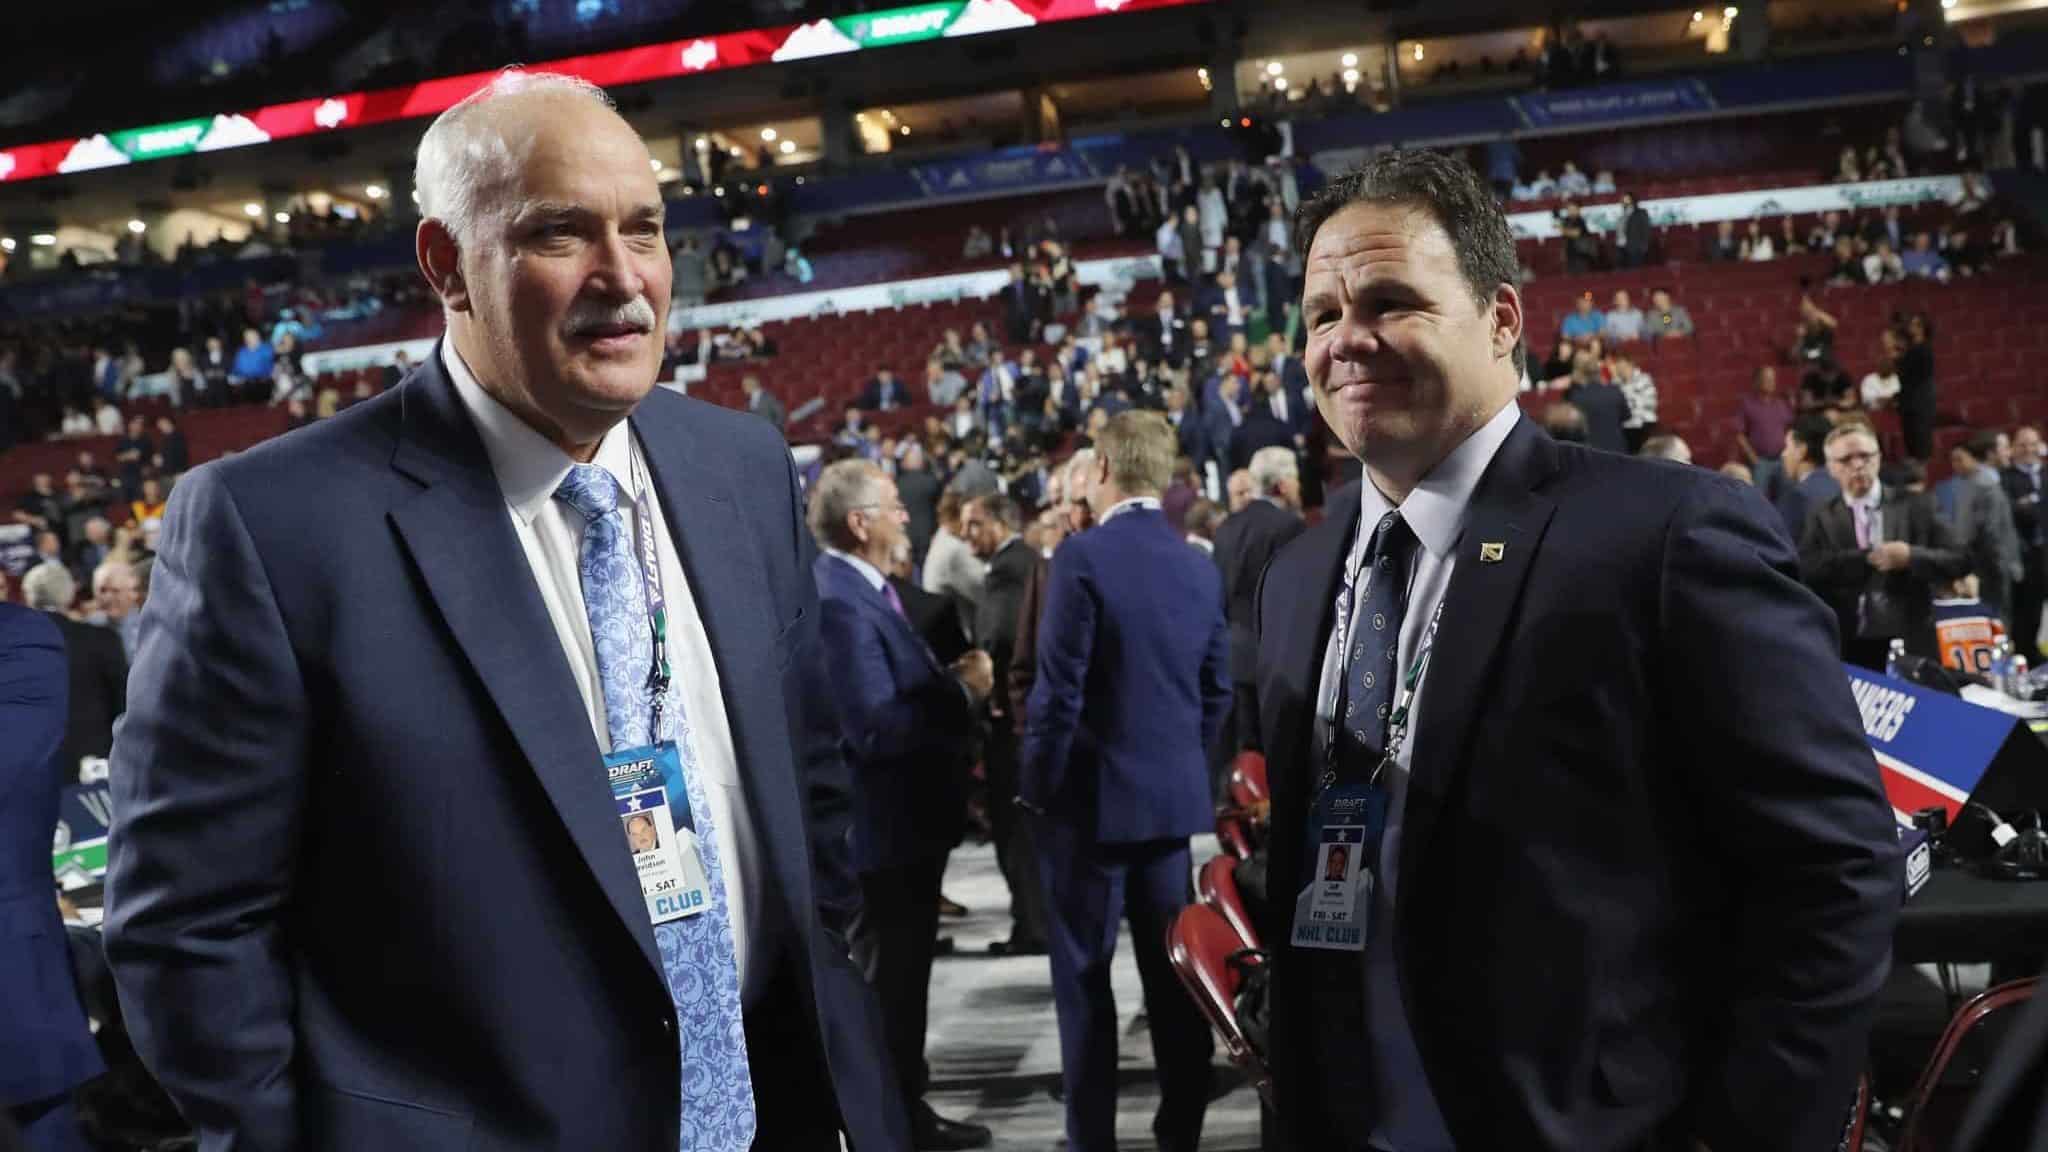 VANCOUVER, BRITISH COLUMBIA - JUNE 21: (L-R) John Davidson and Jeff Gorton of the New York Rangers attends the 2019 NHL Draft at the Rogers Arena on June 21, 2019 in Vancouver, Canada.